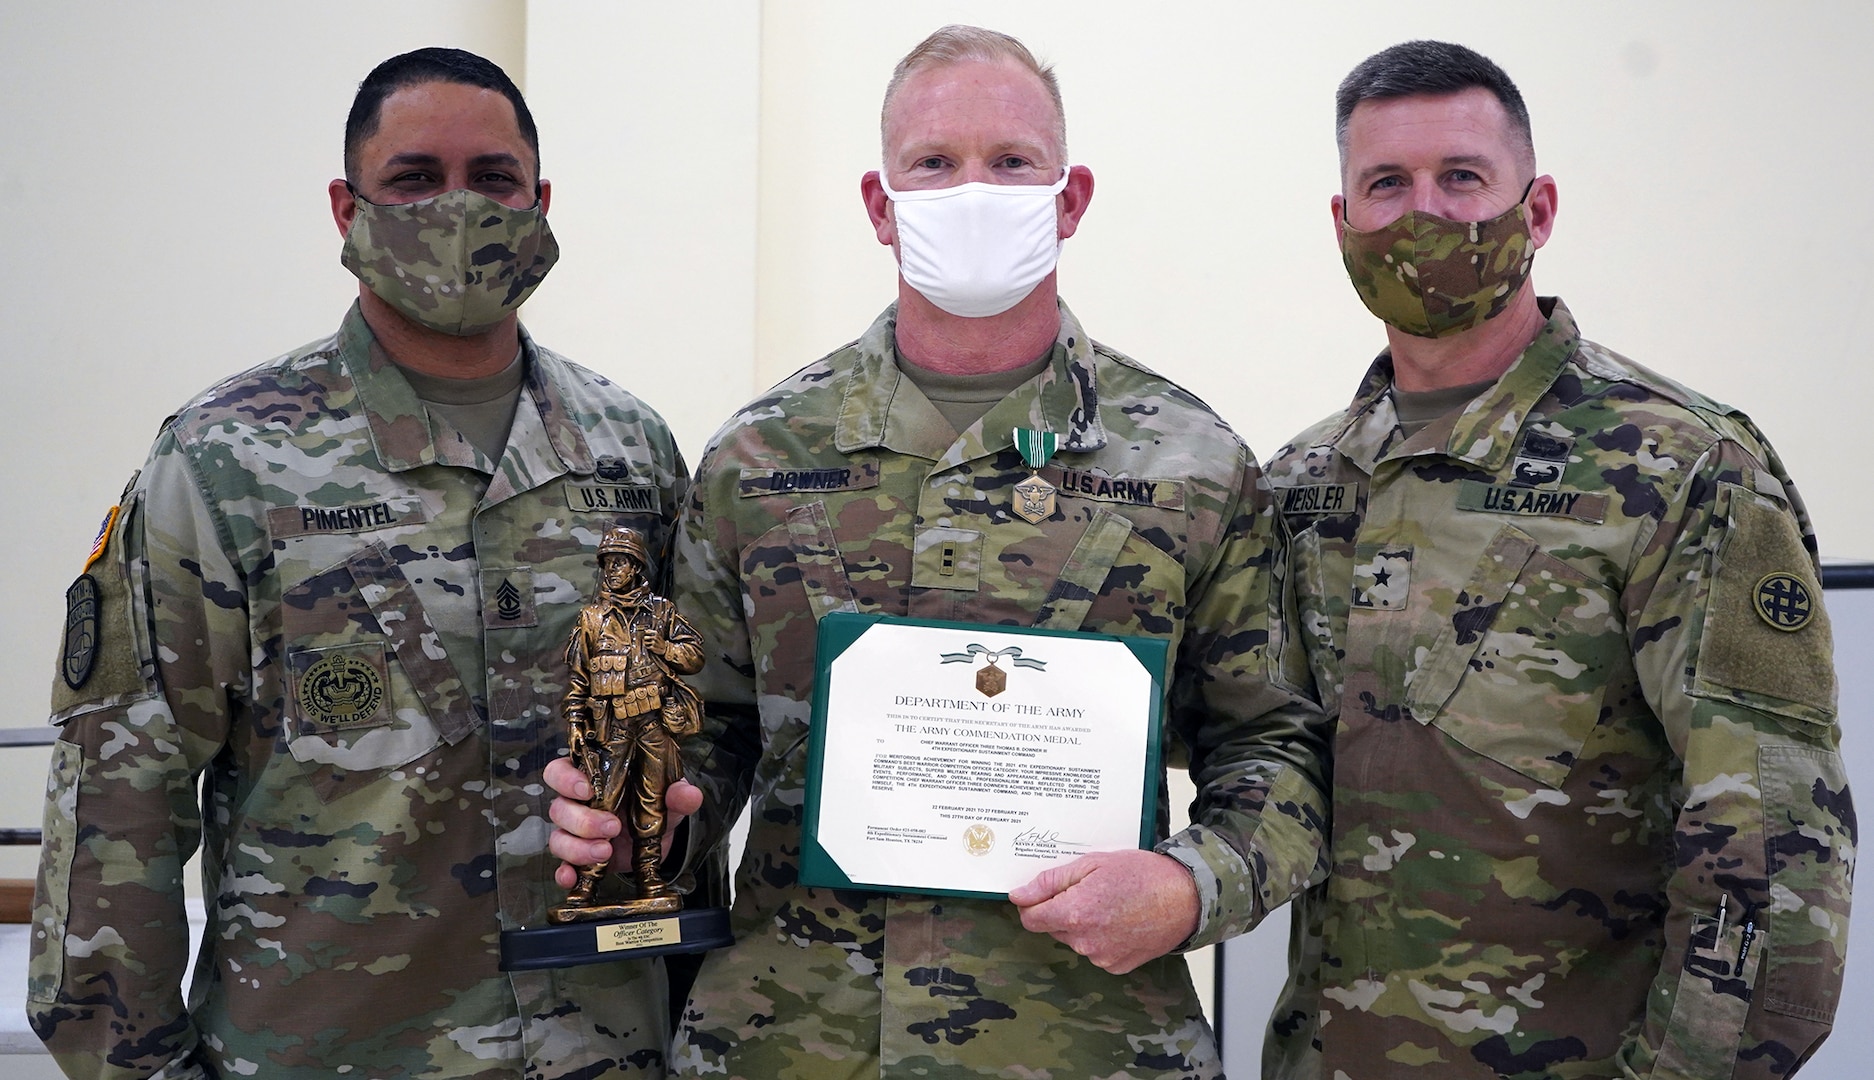 Chief Warrant Officer 2 Thomas Downer (center) receives and Army Commendation Medal from Brig. Gen. Kevin F. Meisler (right), commanding general of  the 4th Sustainment Command (Expeditionary), and 1st Sgt. Jorge Pimentel (left), 4th ESC Headquarter Company First Sergeant.